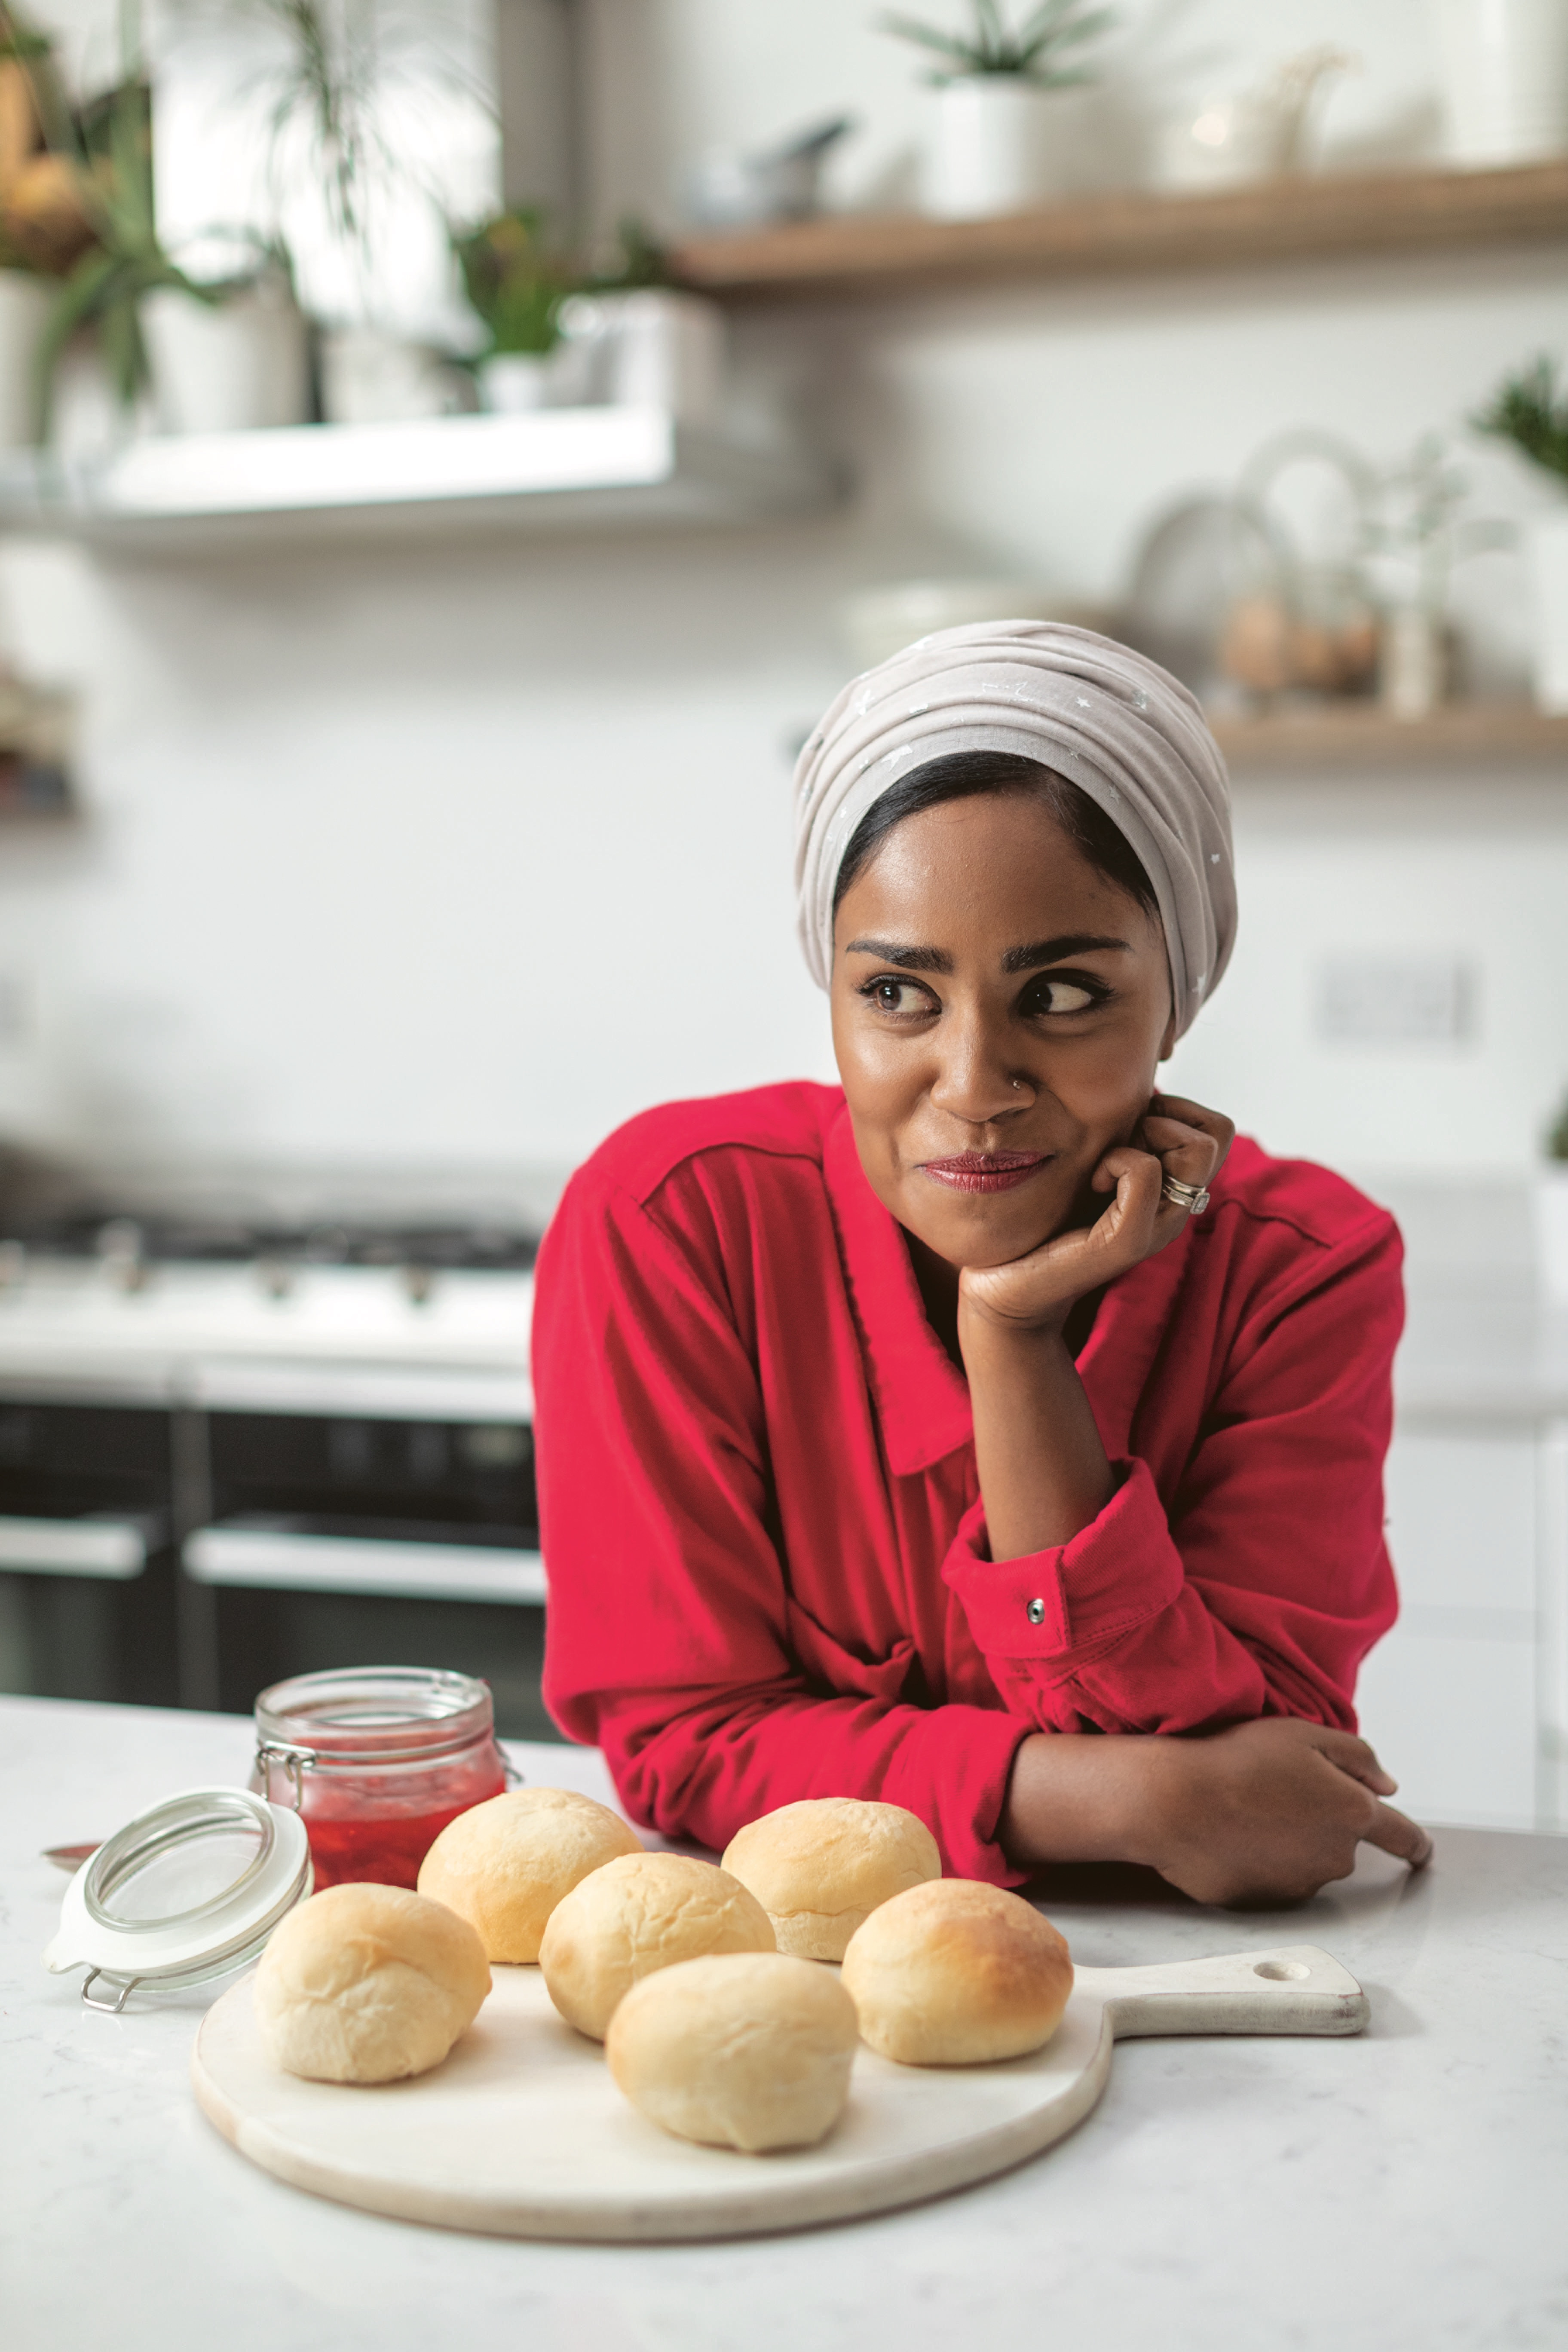 Nadiya Hussain Baked for the Queen of England Christopher Kimball's Milk Street